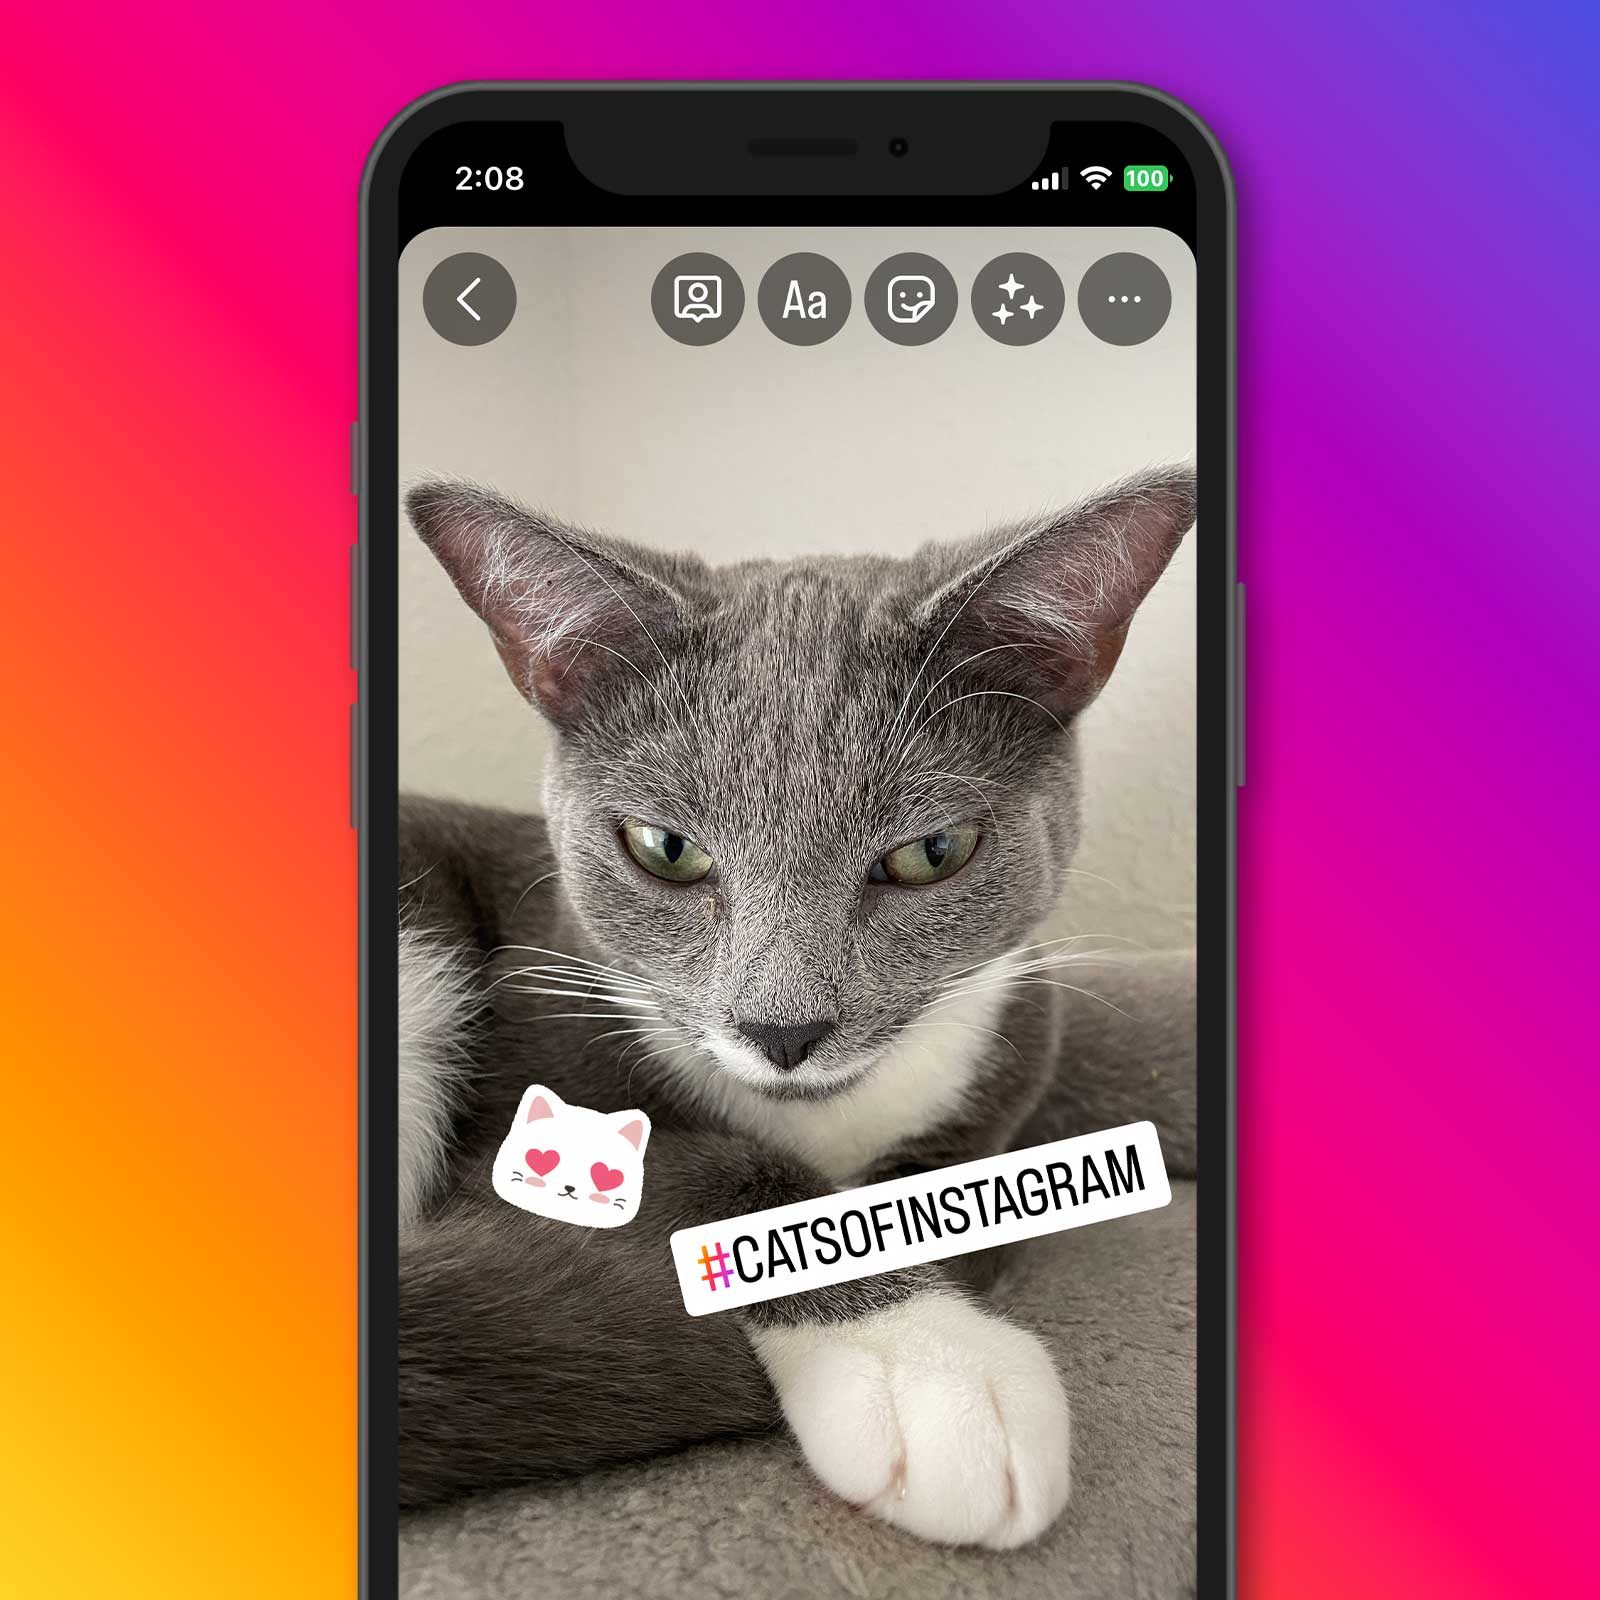 What Are Instagram Stories? | How to Create Instagram Stories